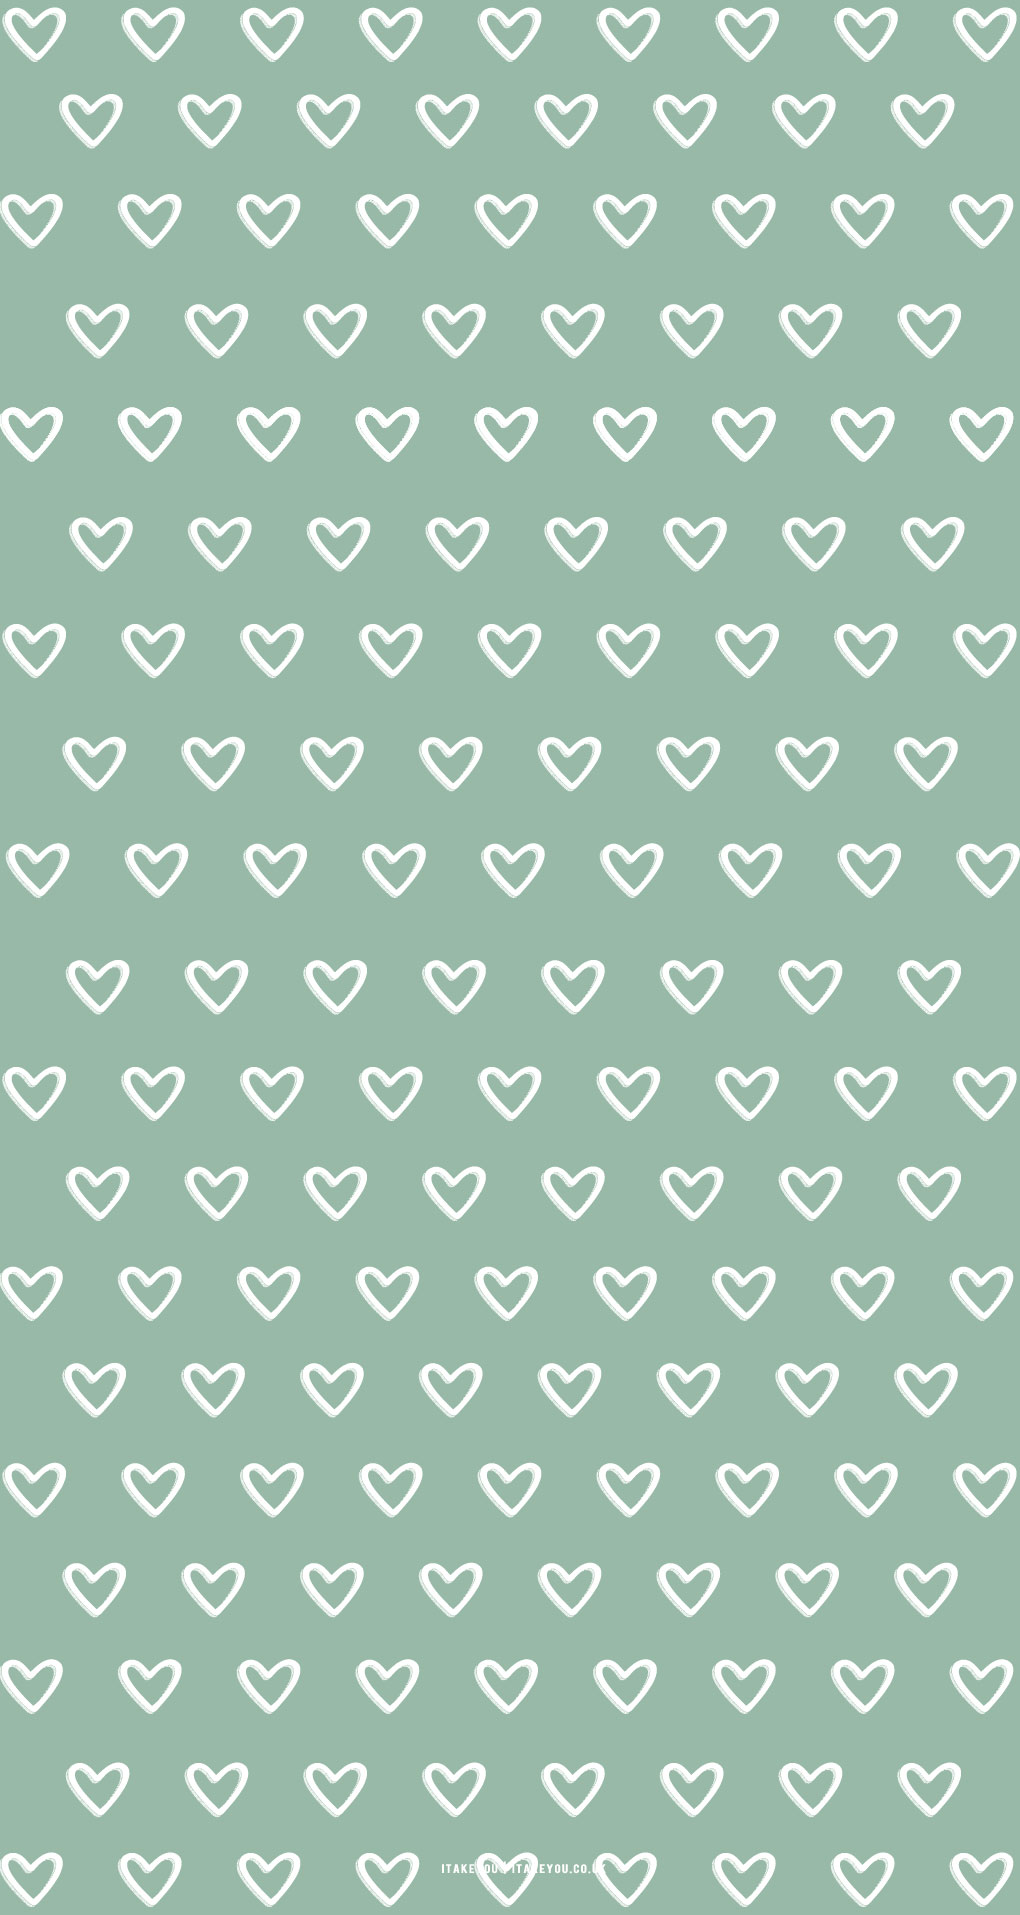 15 Sage Green Minimalist Wallpapers for Phone : Lots of Heart Wallpaper I  Take You | Wedding Readings | Wedding Ideas | Wedding Dresses | Wedding  Theme